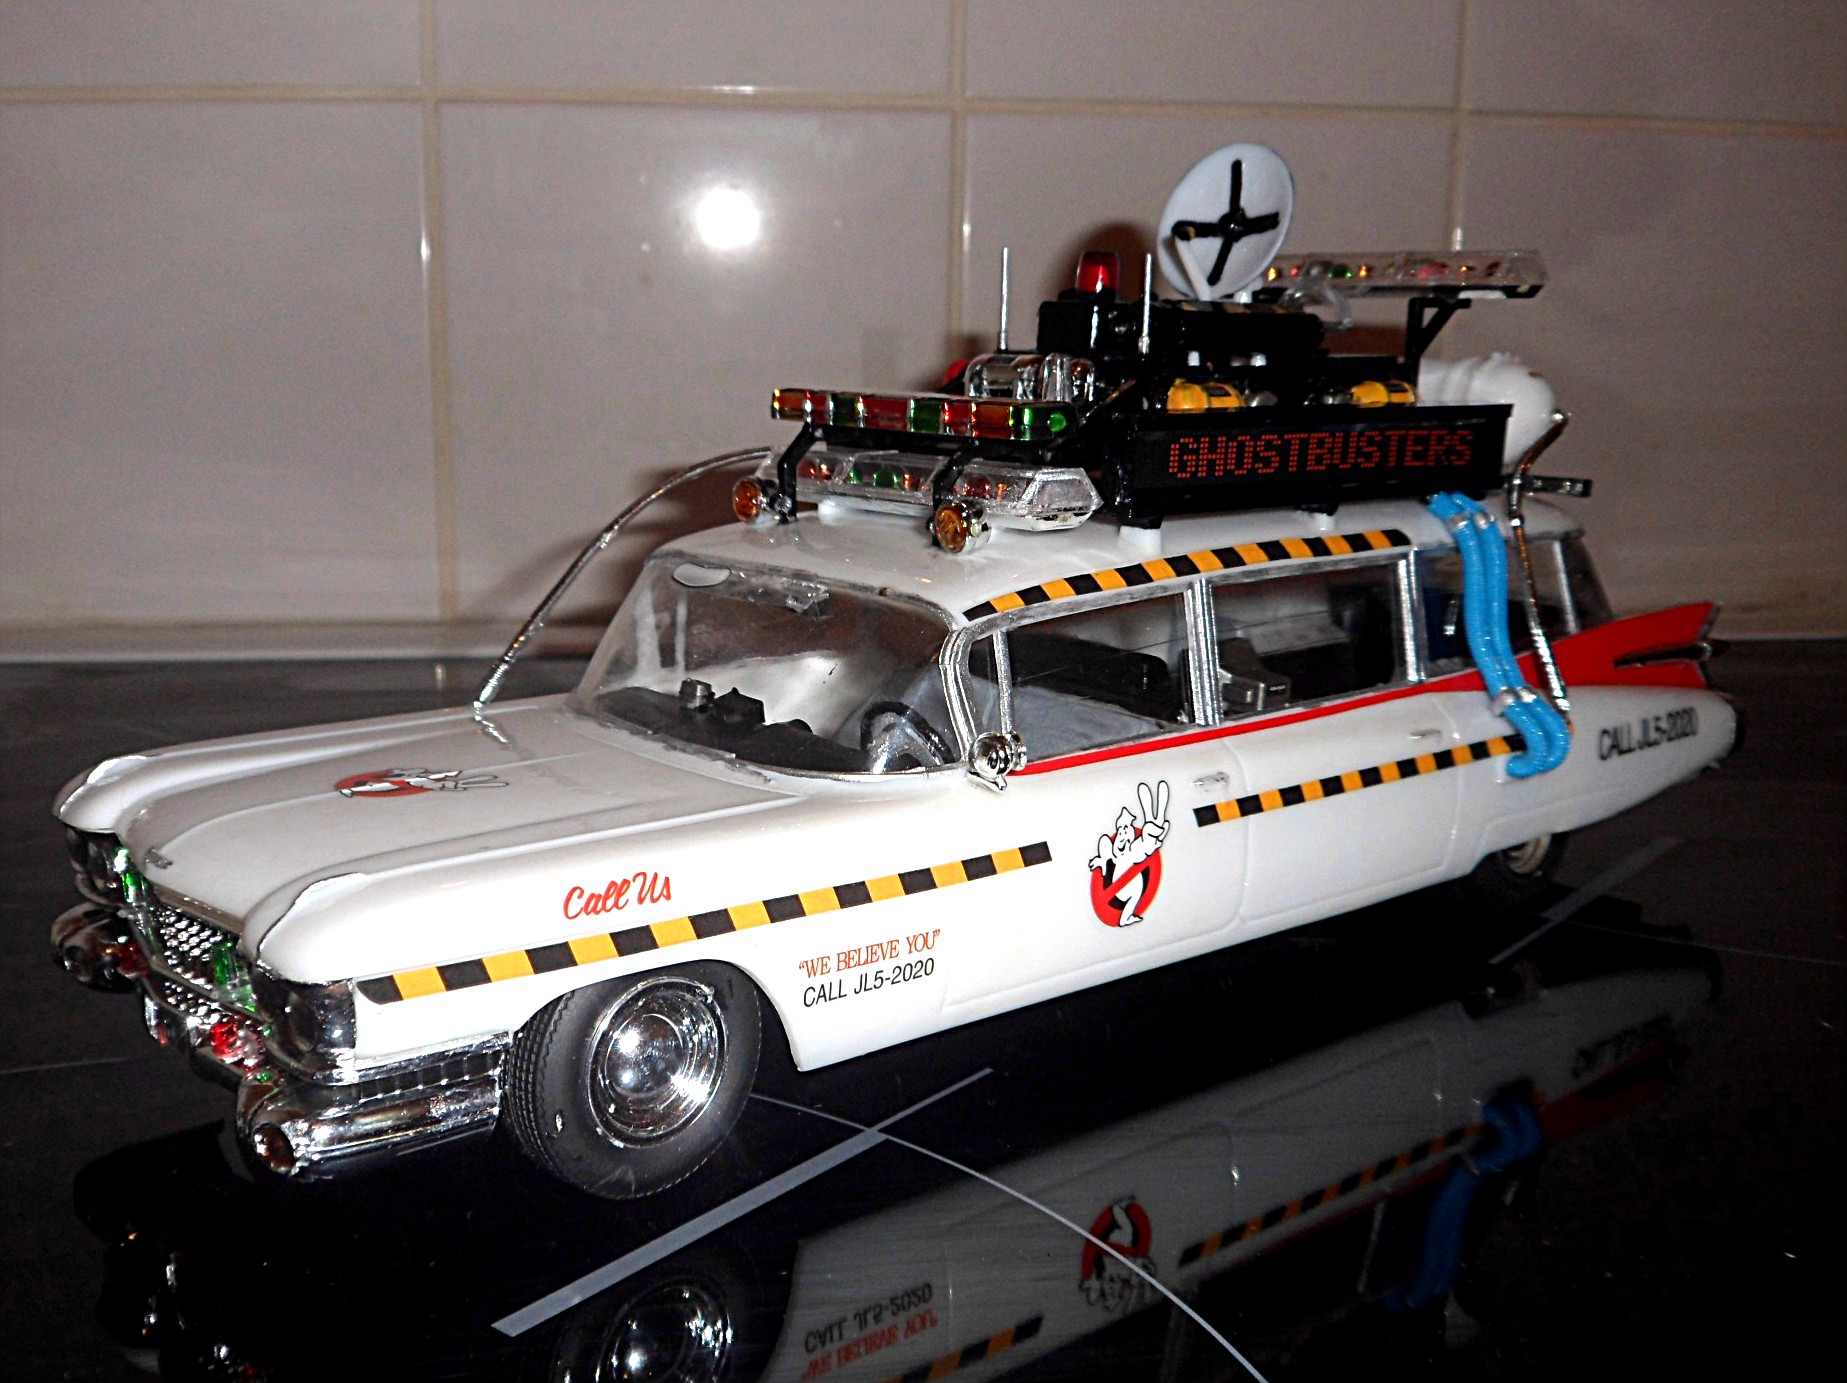 Ghostbusters 59 Cadillac, finished just in time for Halloween!